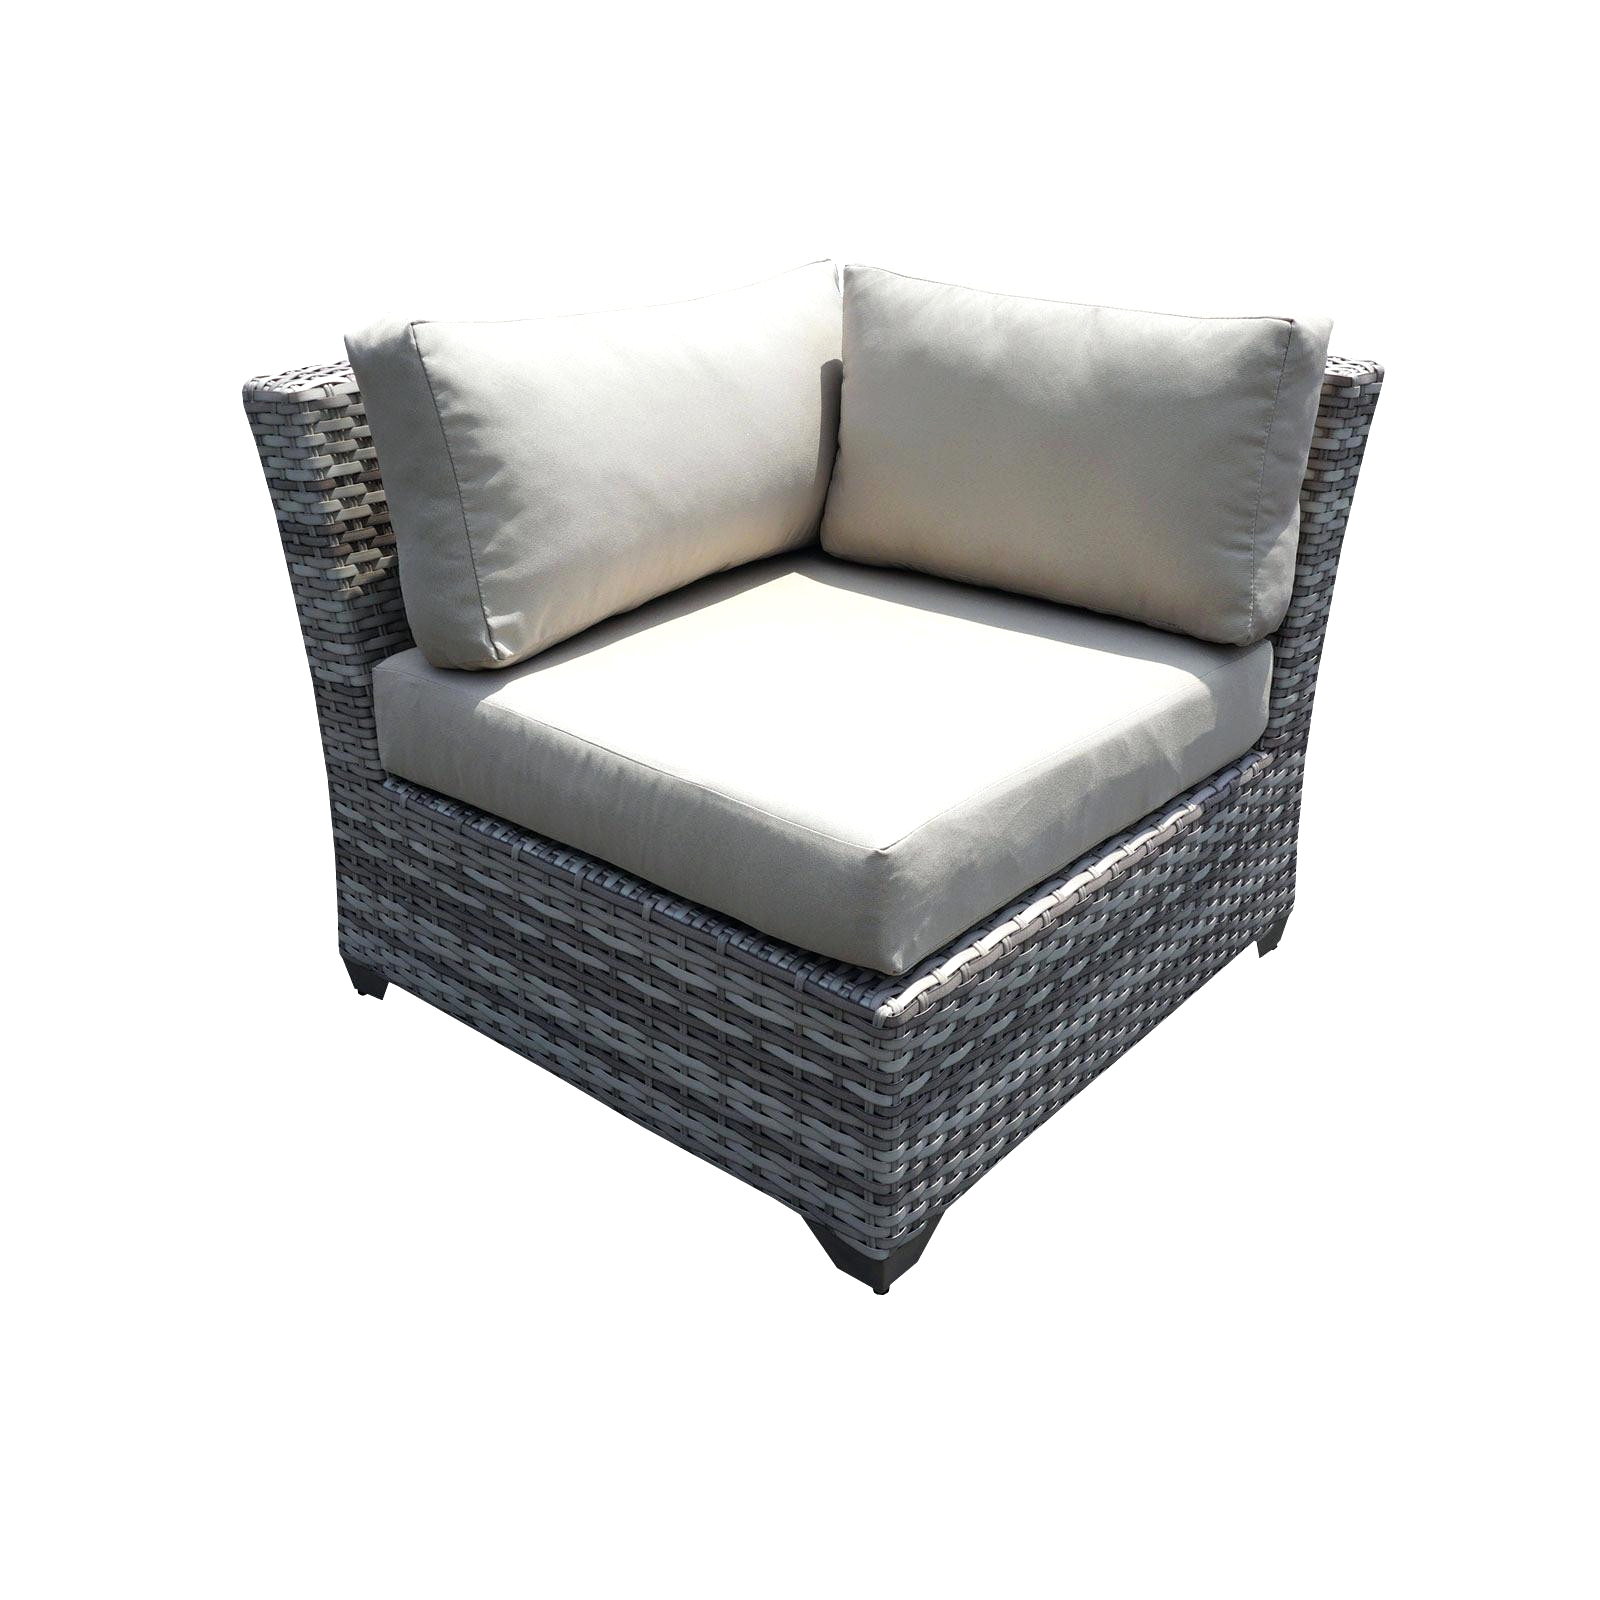 patio chairs at lowes lovely patio recliners unique wicker outdoor sofa 0d patio chairs sale